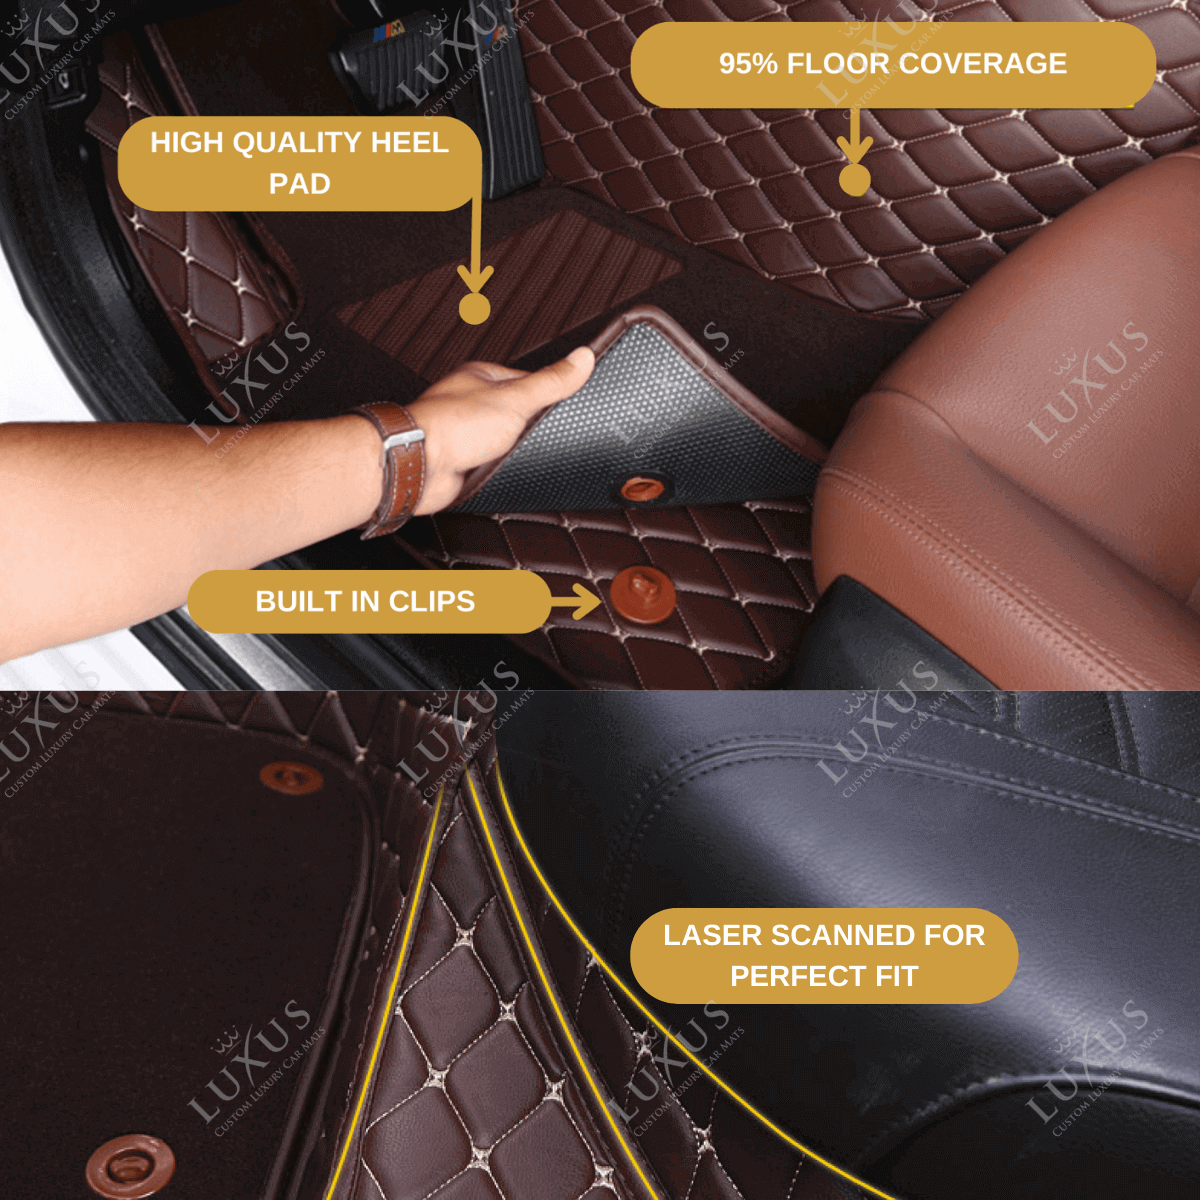 Black & Red Stitching Honeycomb Base & Brown Top Carpet Double Layer Luxury Car Mats Set